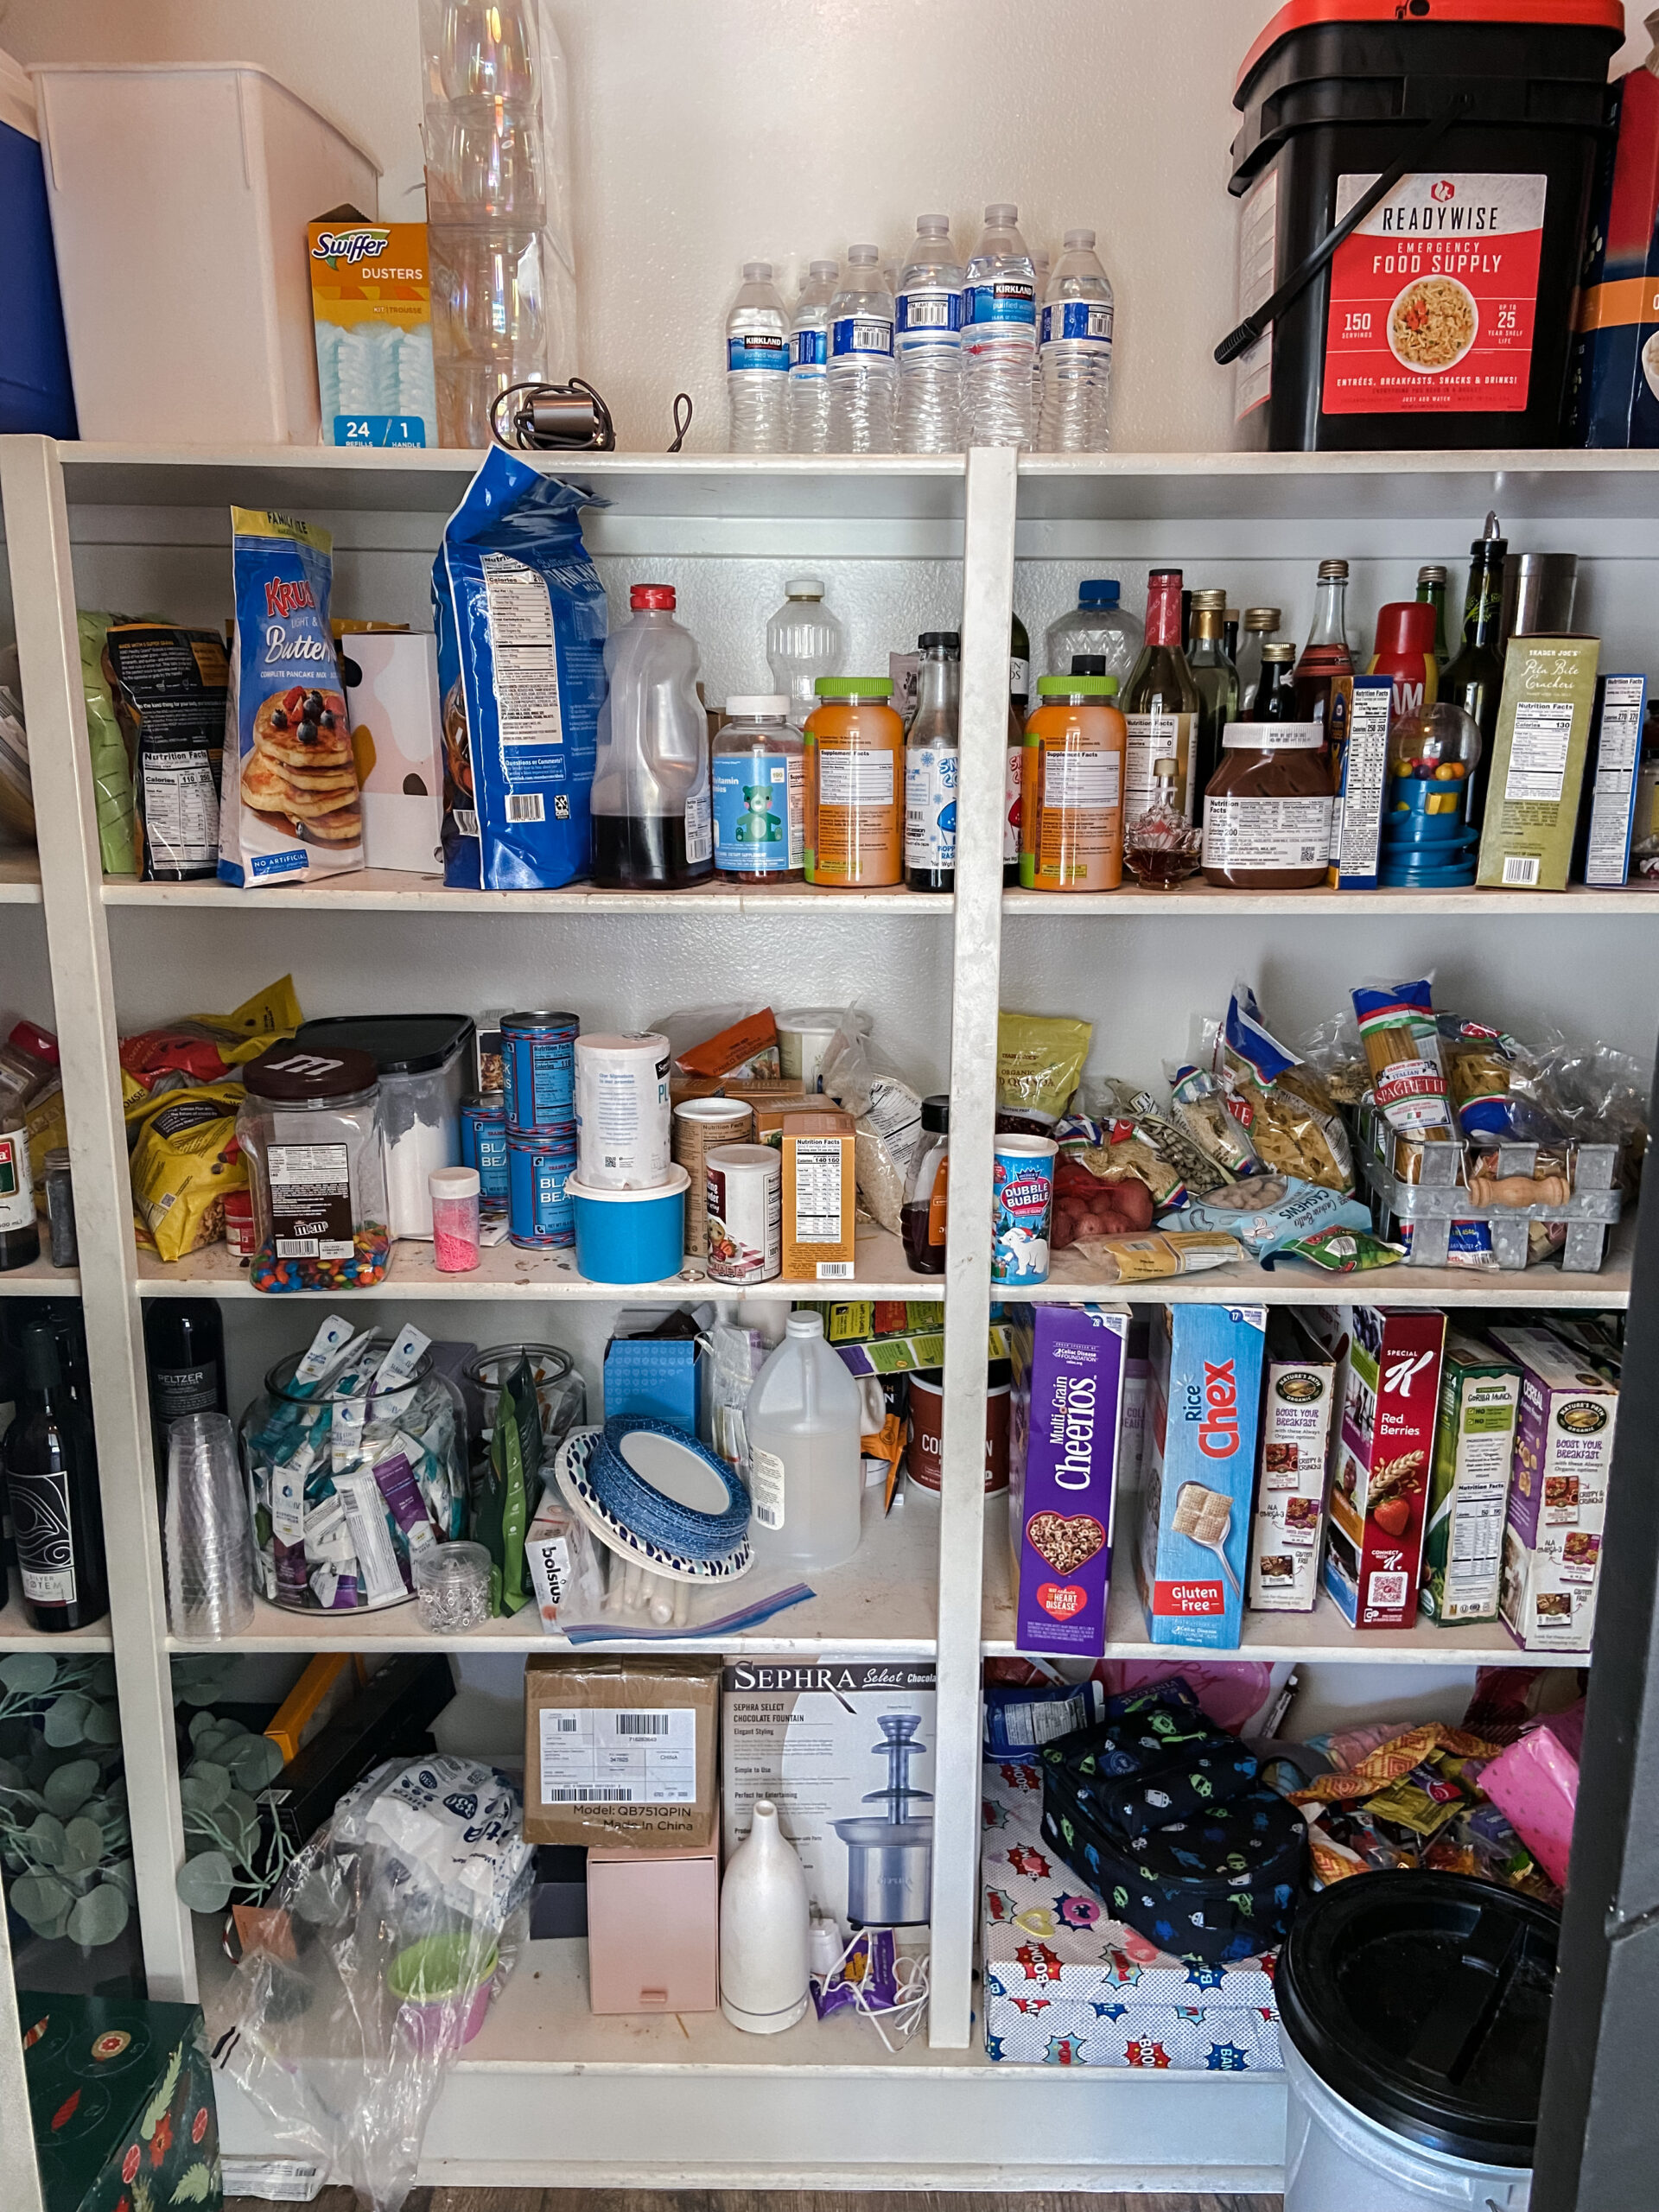 PANTRY ORGANIZATION WITH AMAZON-Jaclyn De Leon style. Follow along while I totally revamp my pantry. Amazon has great organizing bins and baskets to help your pantry stay organize and functional.